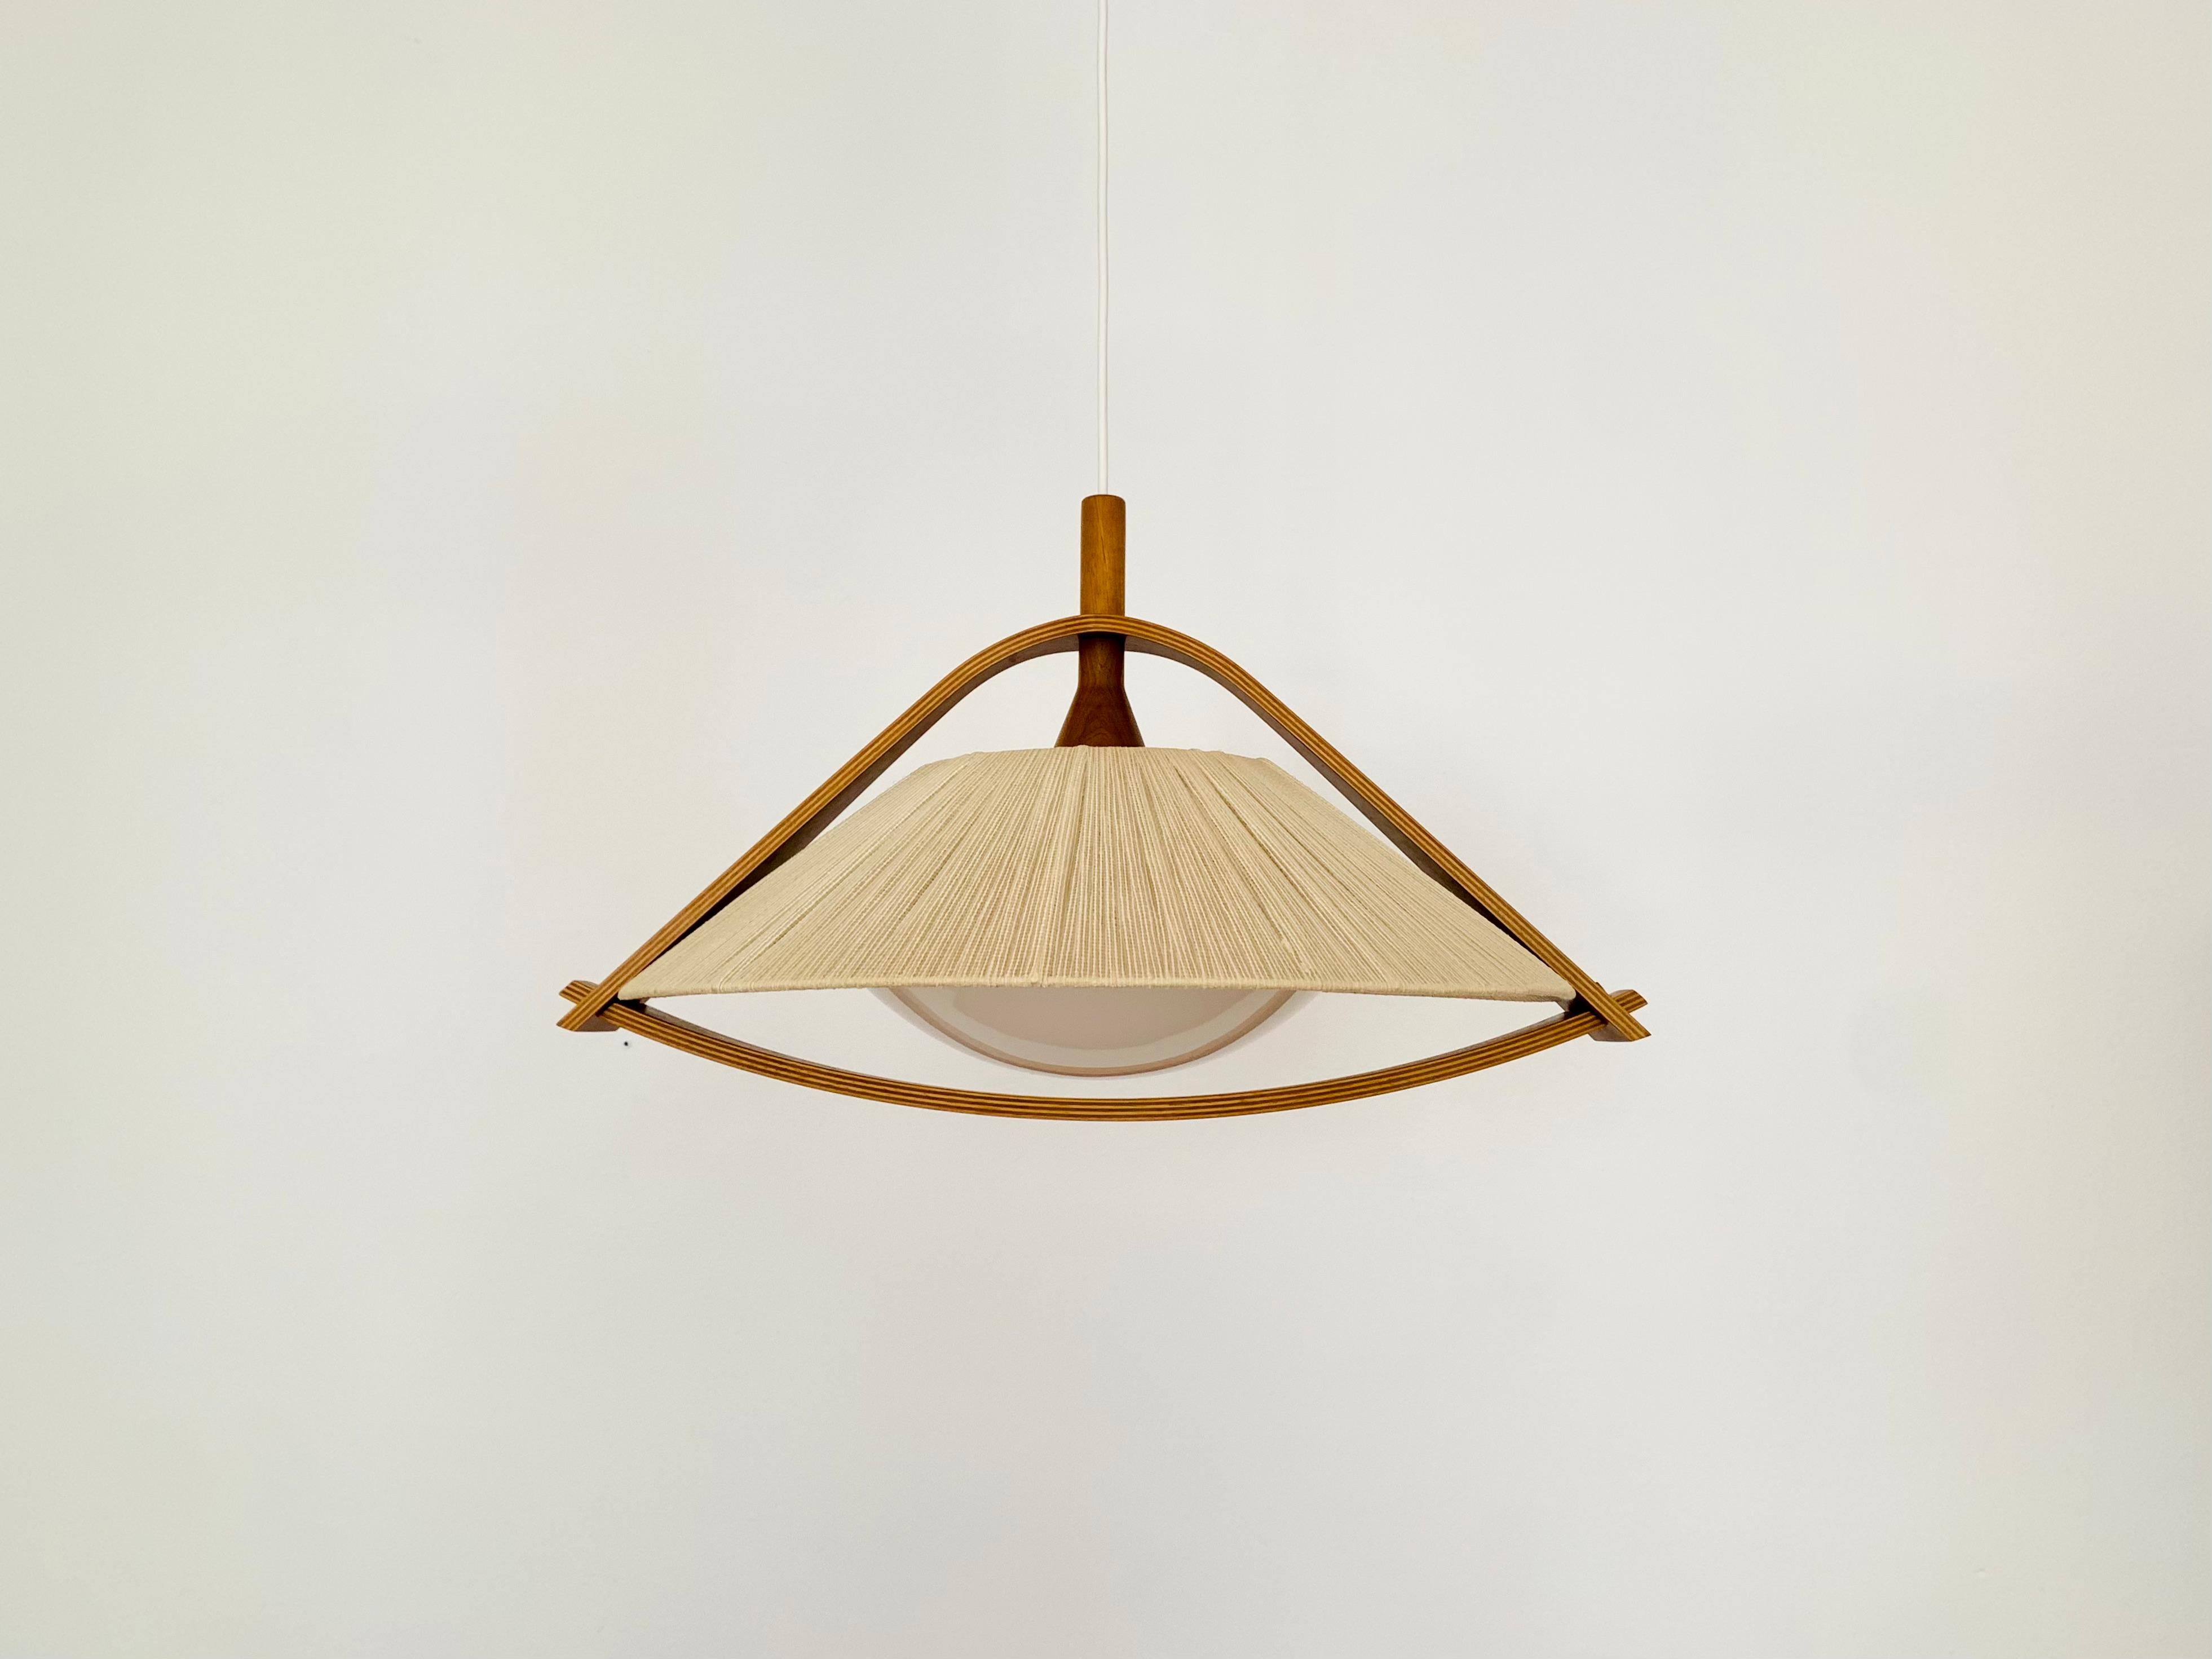 Exceptionally beautiful and large pendant lamp from the 1960s.
The design is very unusual.
The shape and materials create a warm and very pleasant light.

Condition:

Very good vintage condition with slight signs of age-related wear.
The raffia